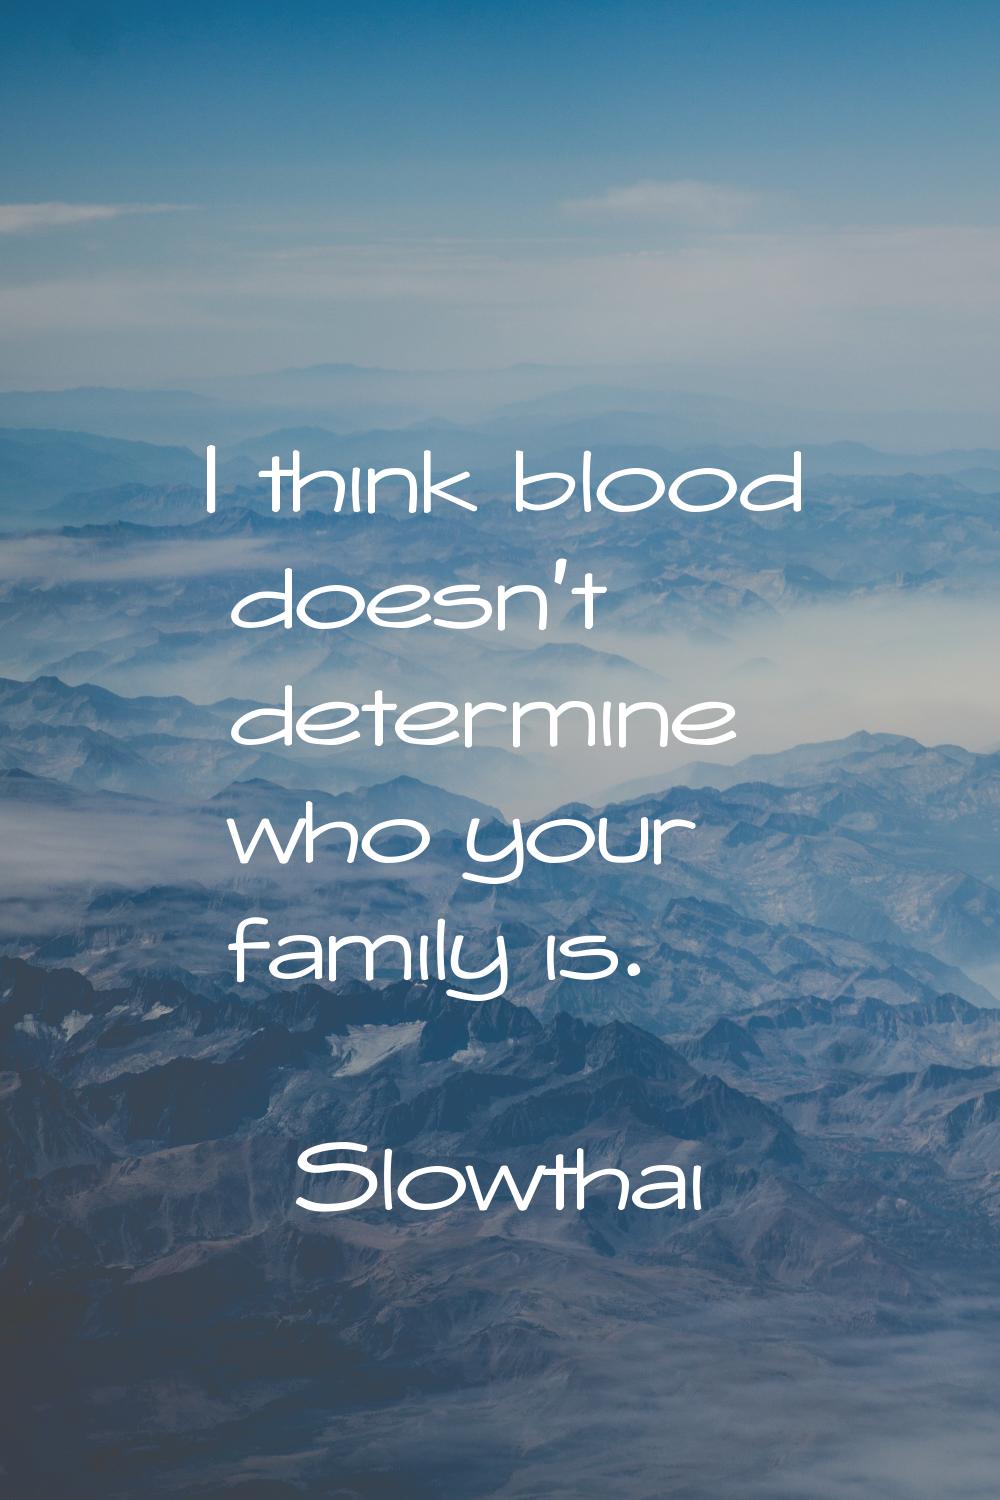 I think blood doesn't determine who your family is.